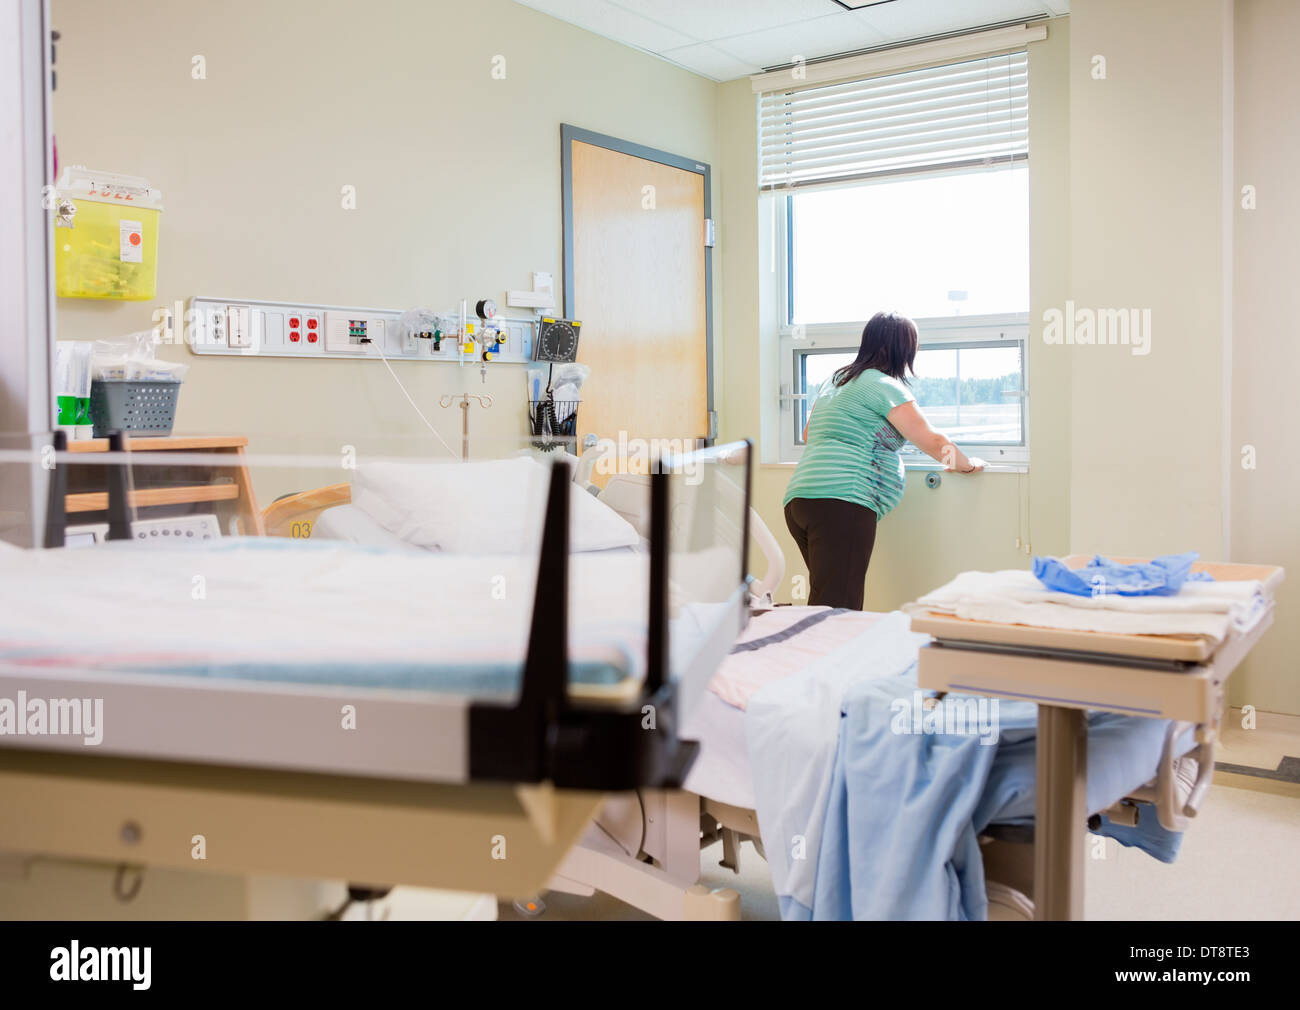 Pregnant Woman At Window In Hospital Room Stock Photo